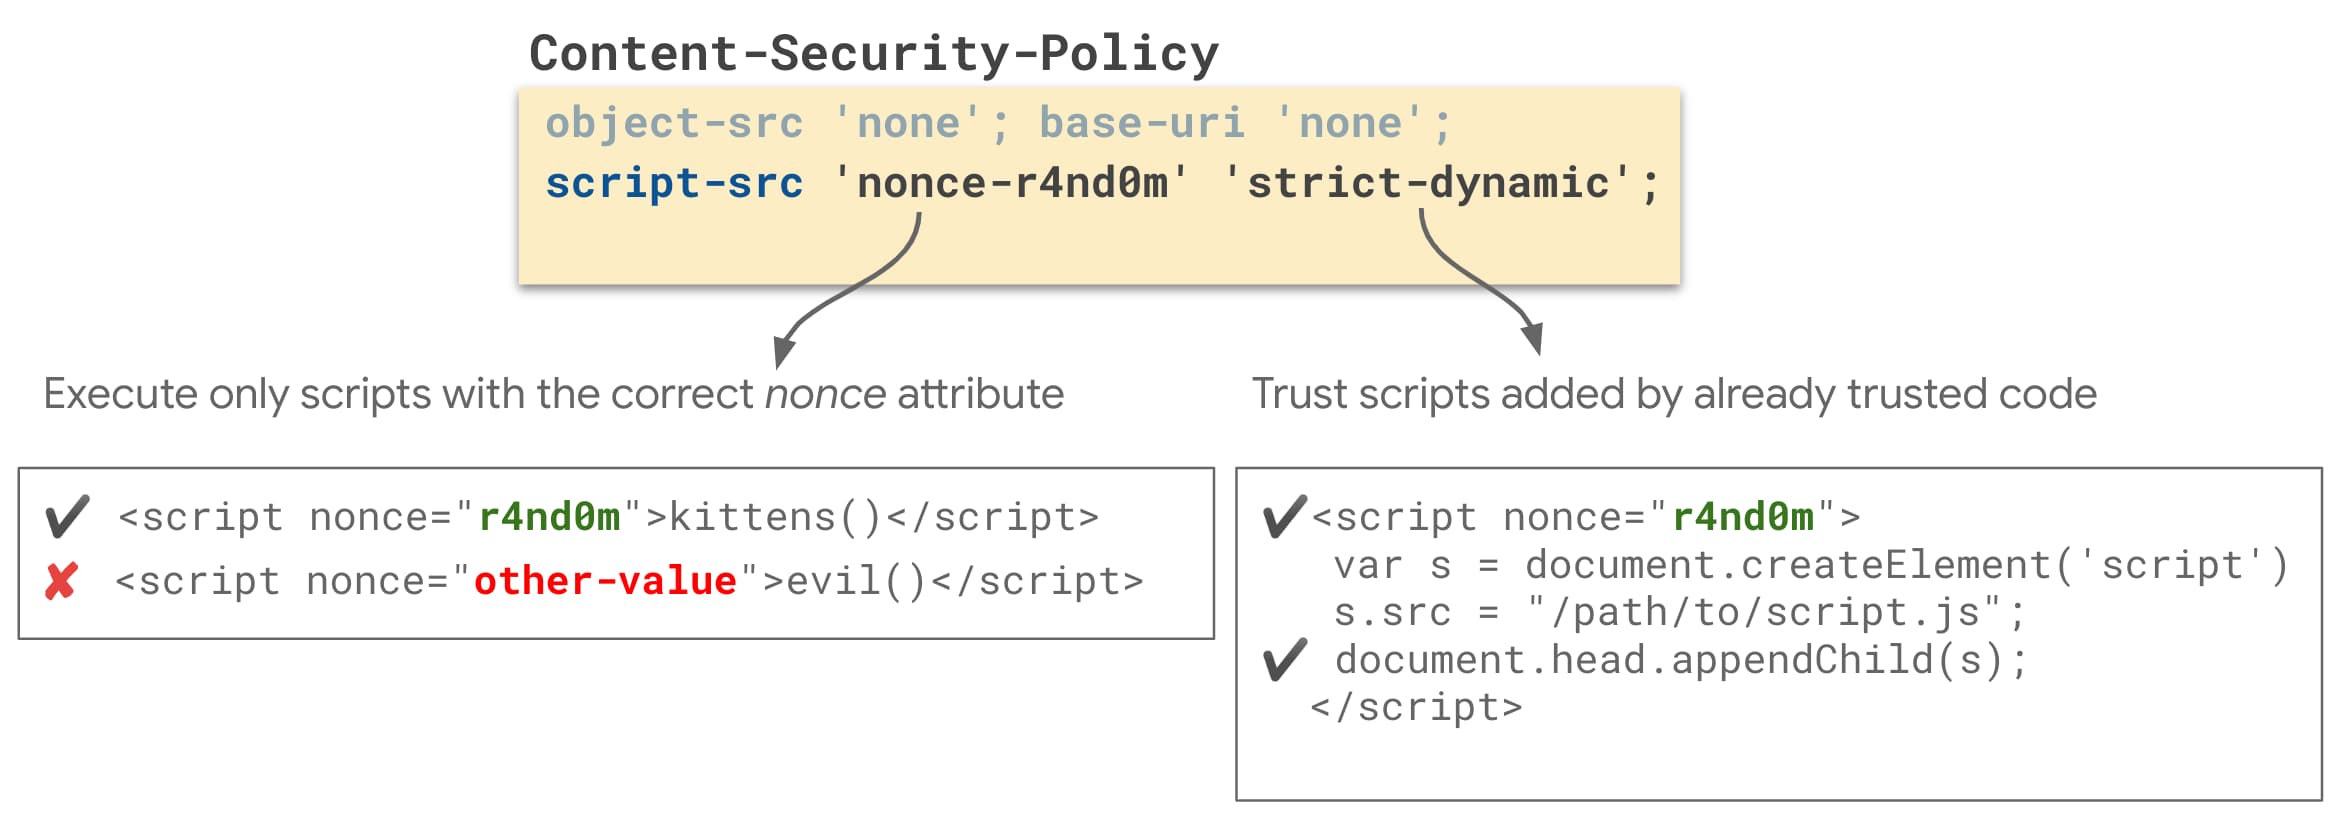 Protecting Your Users Against Cross-site Scripting